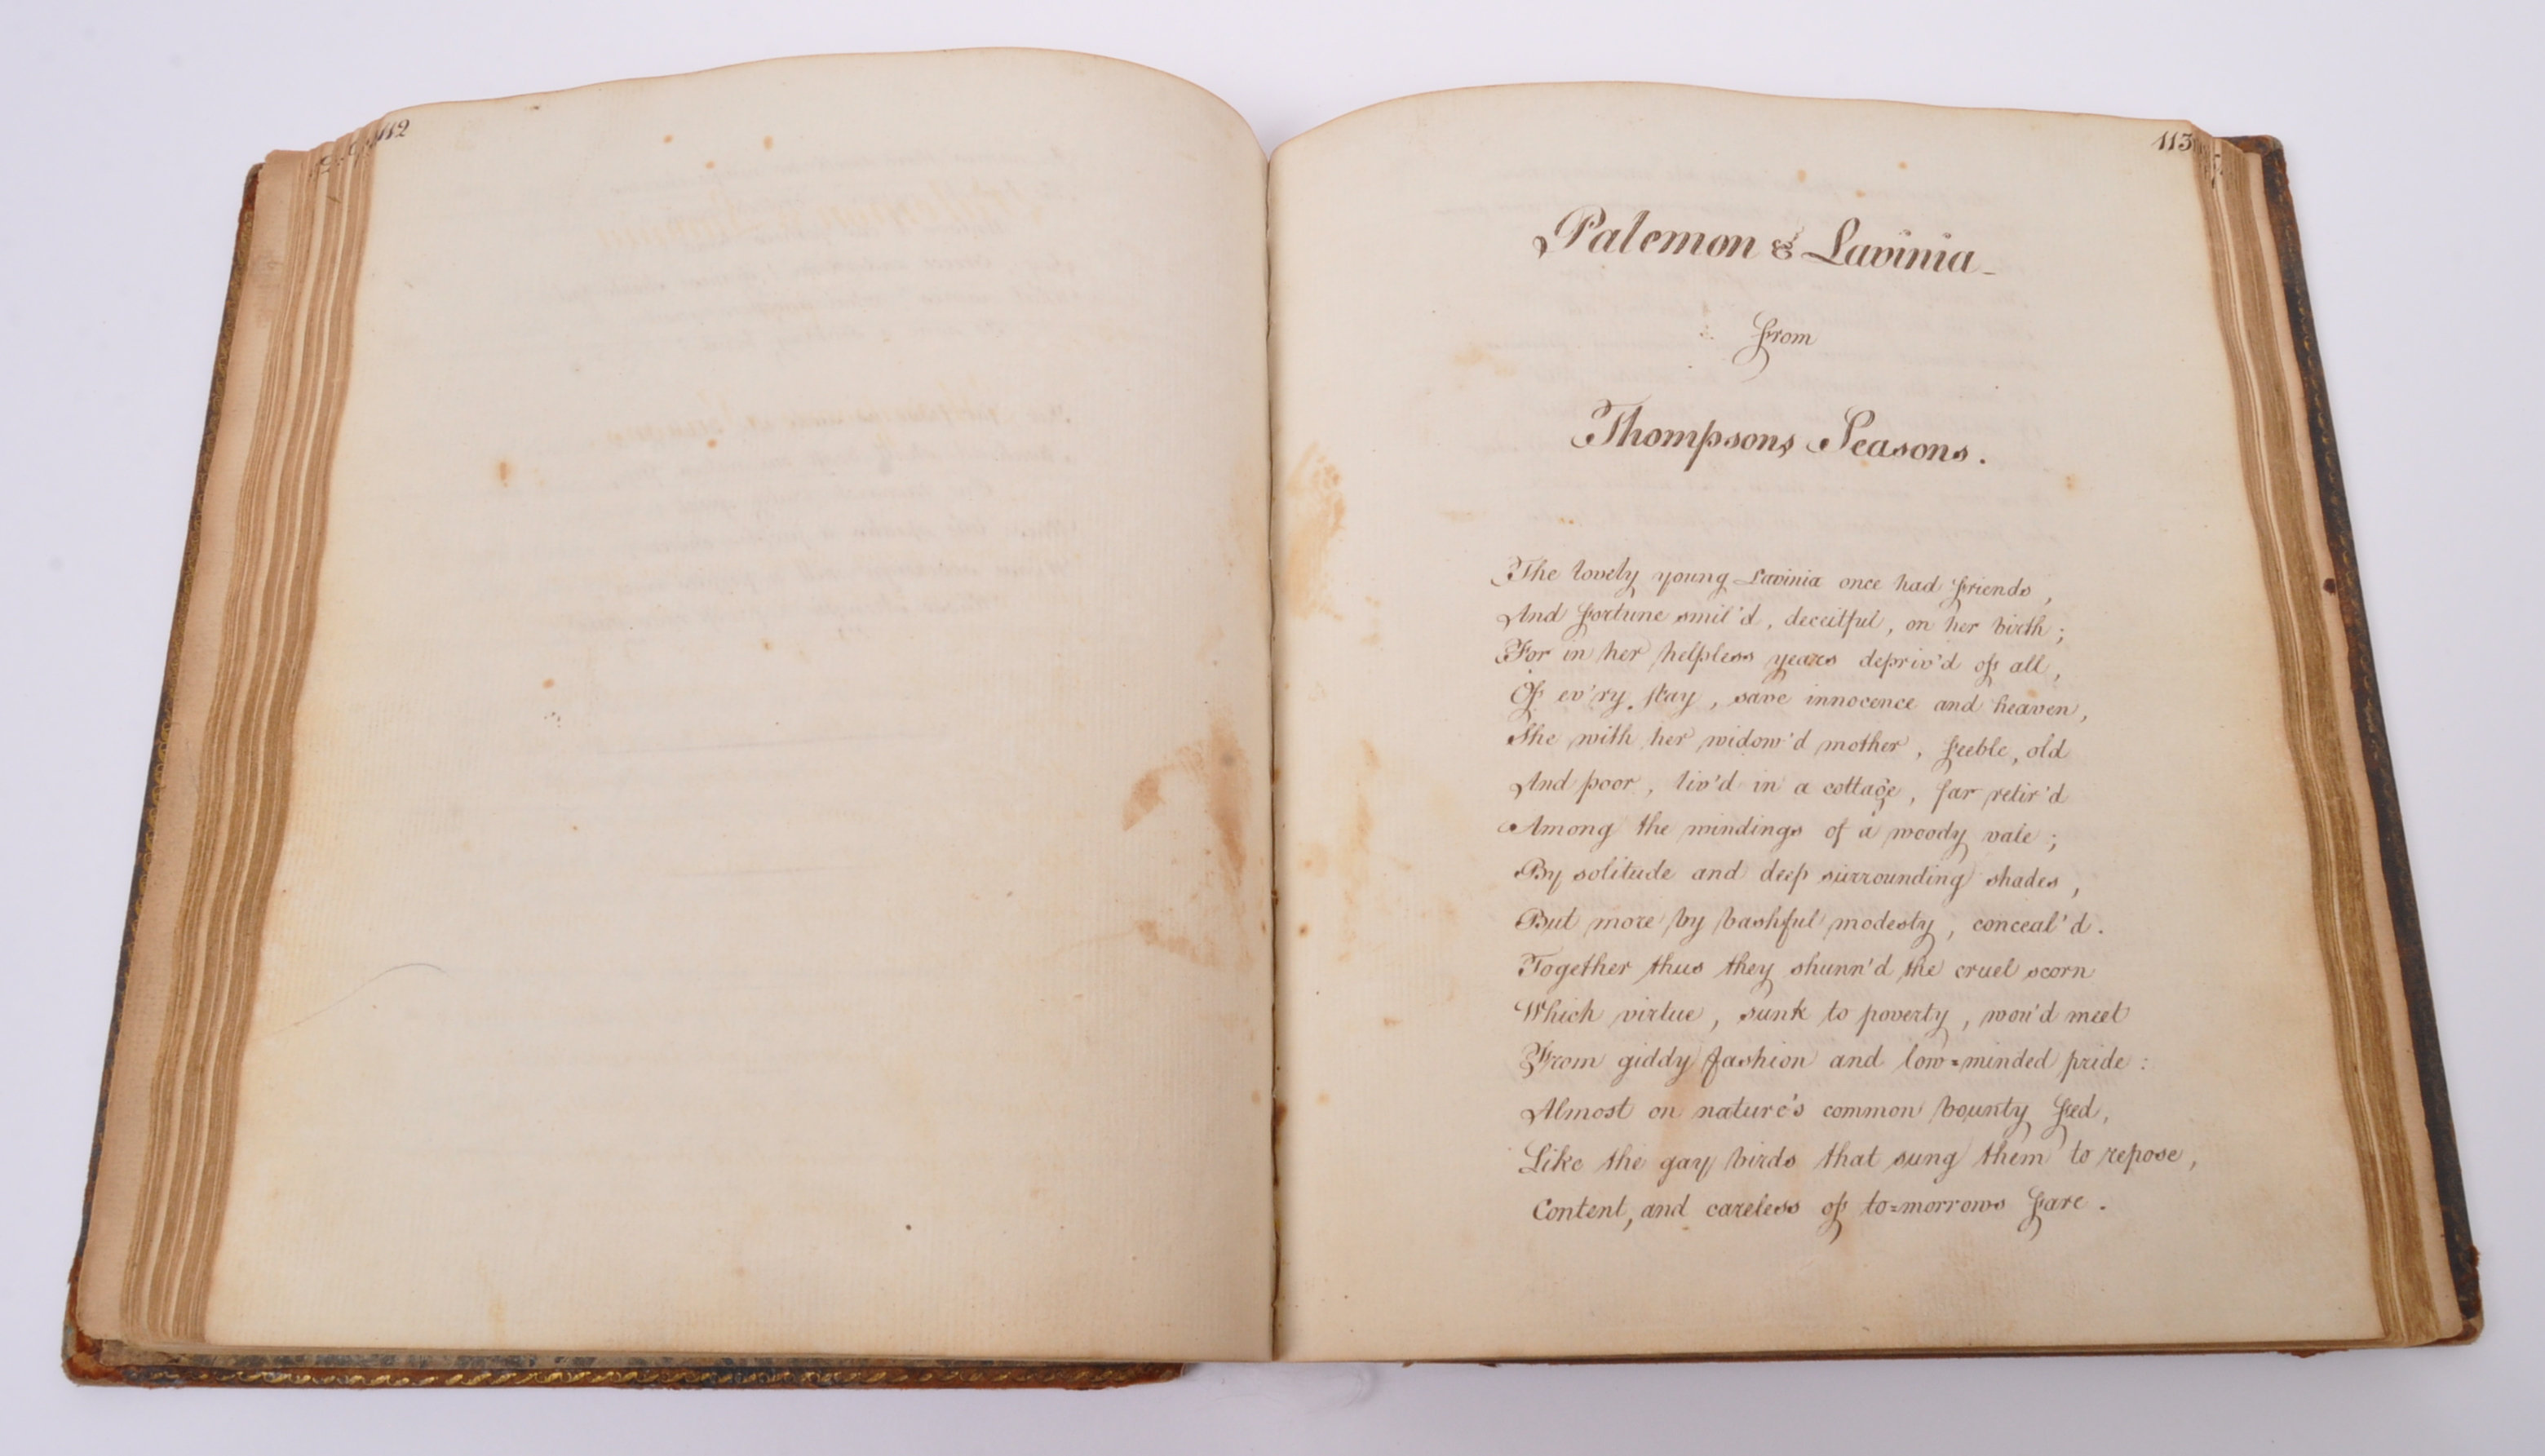 1794 - A COLLECTION OF POEMS - HANDWRITTEN MANUSCRIPT BOOK - Image 9 of 13